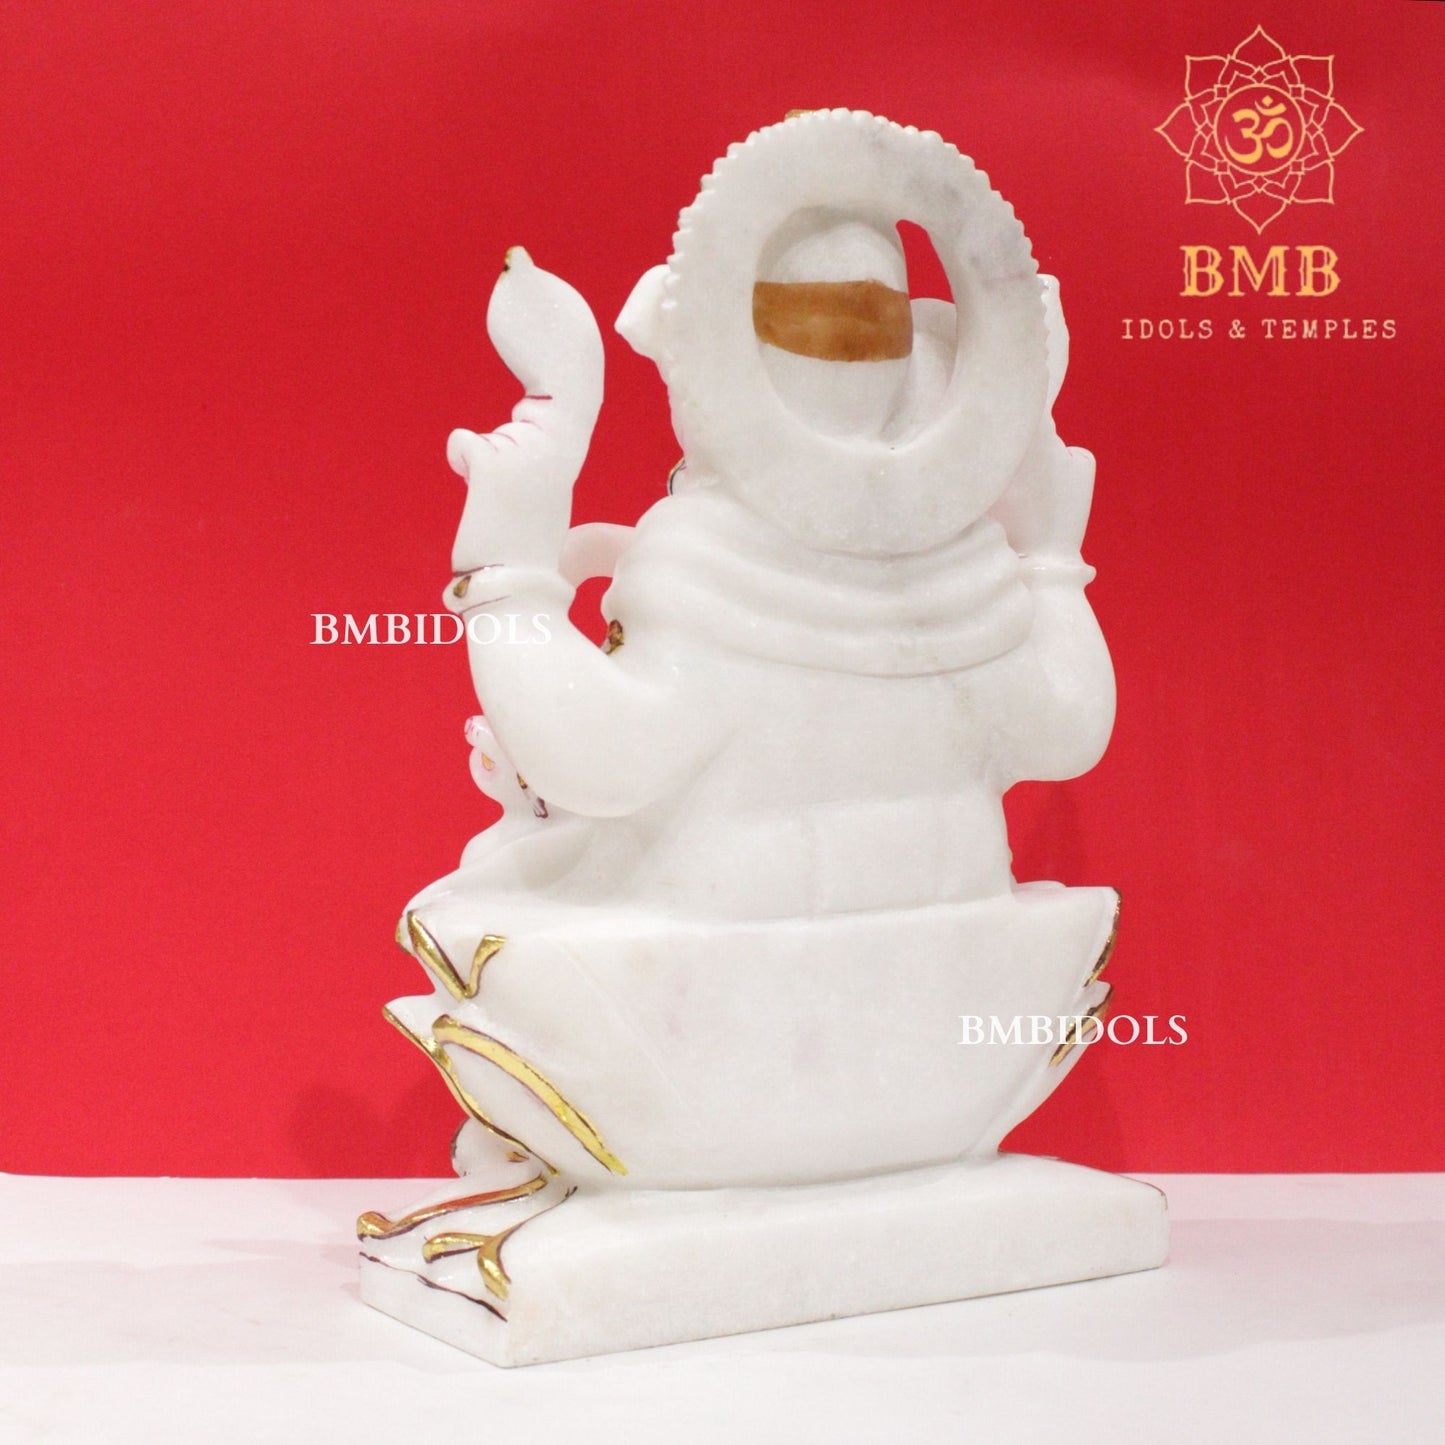 Marble Ganesh Idol in Makrana Marble in 12inches sitting on Lotus